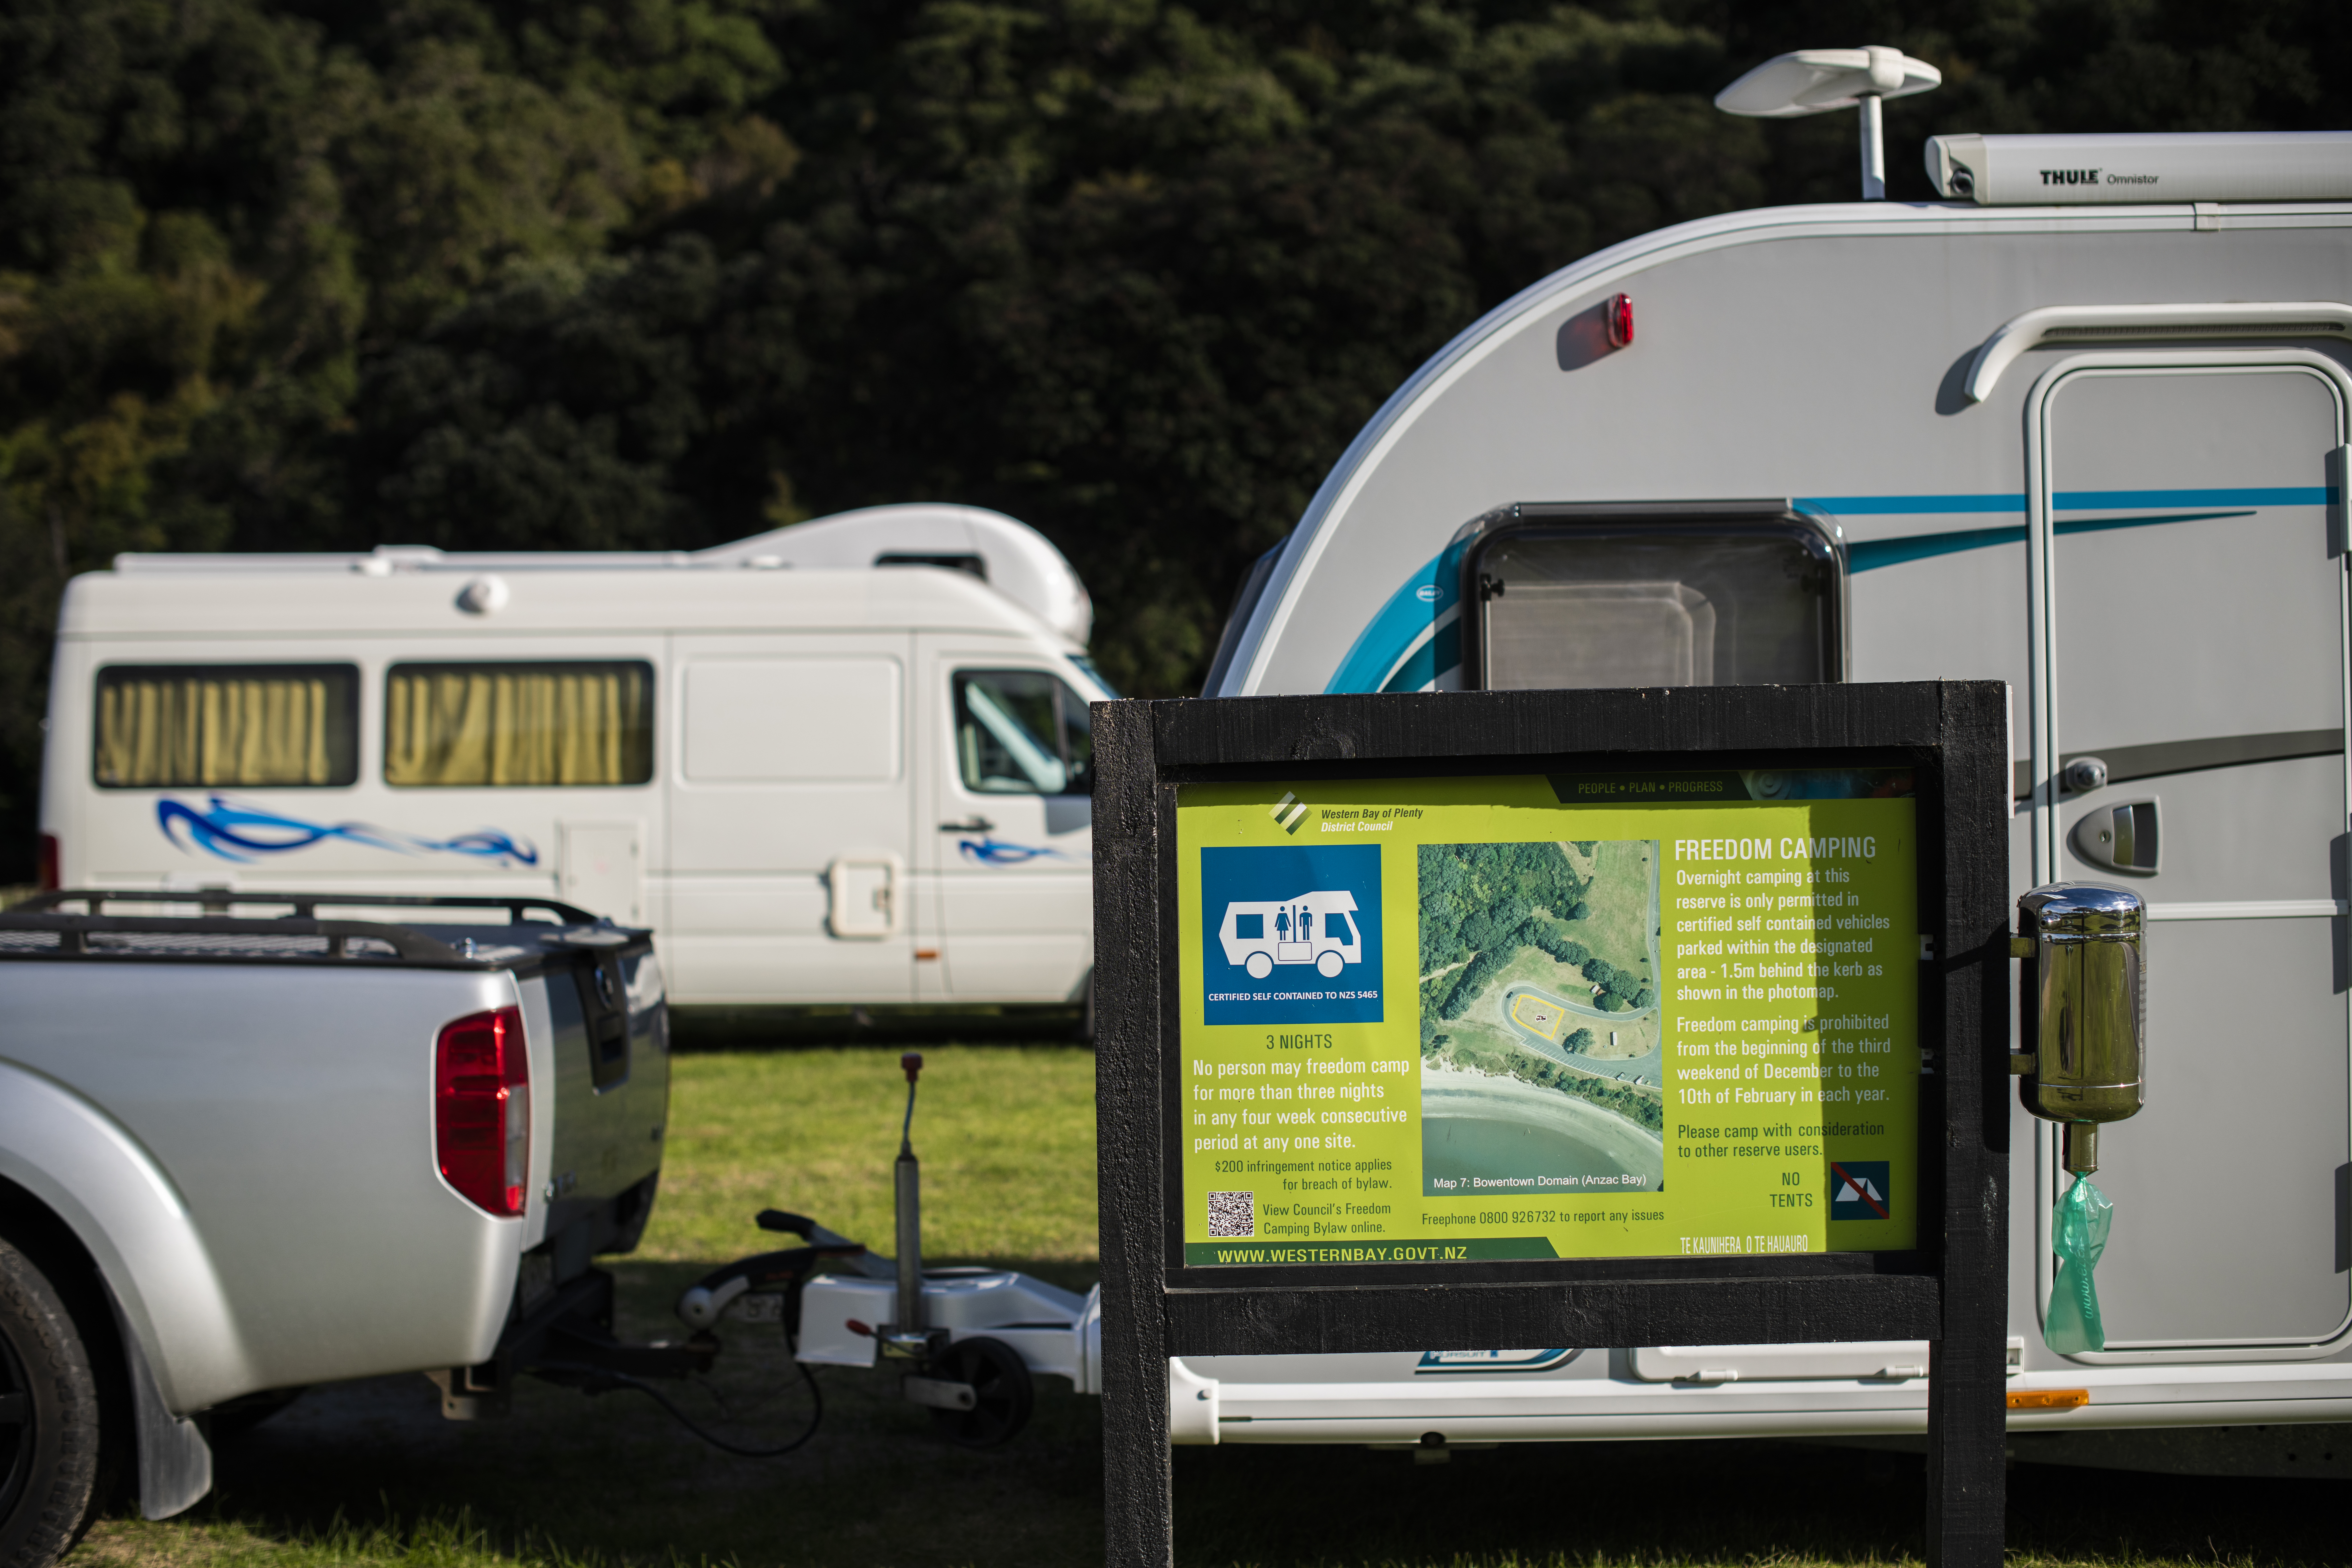 Freedom campers will be asked to move to the three remaining freedom camp sites open that have the necessary facilities and hygiene precautions in place - ​Commerce Lane car park, Te Puke; Marine Park, Tauranga; Uretara Domain, Katikati.